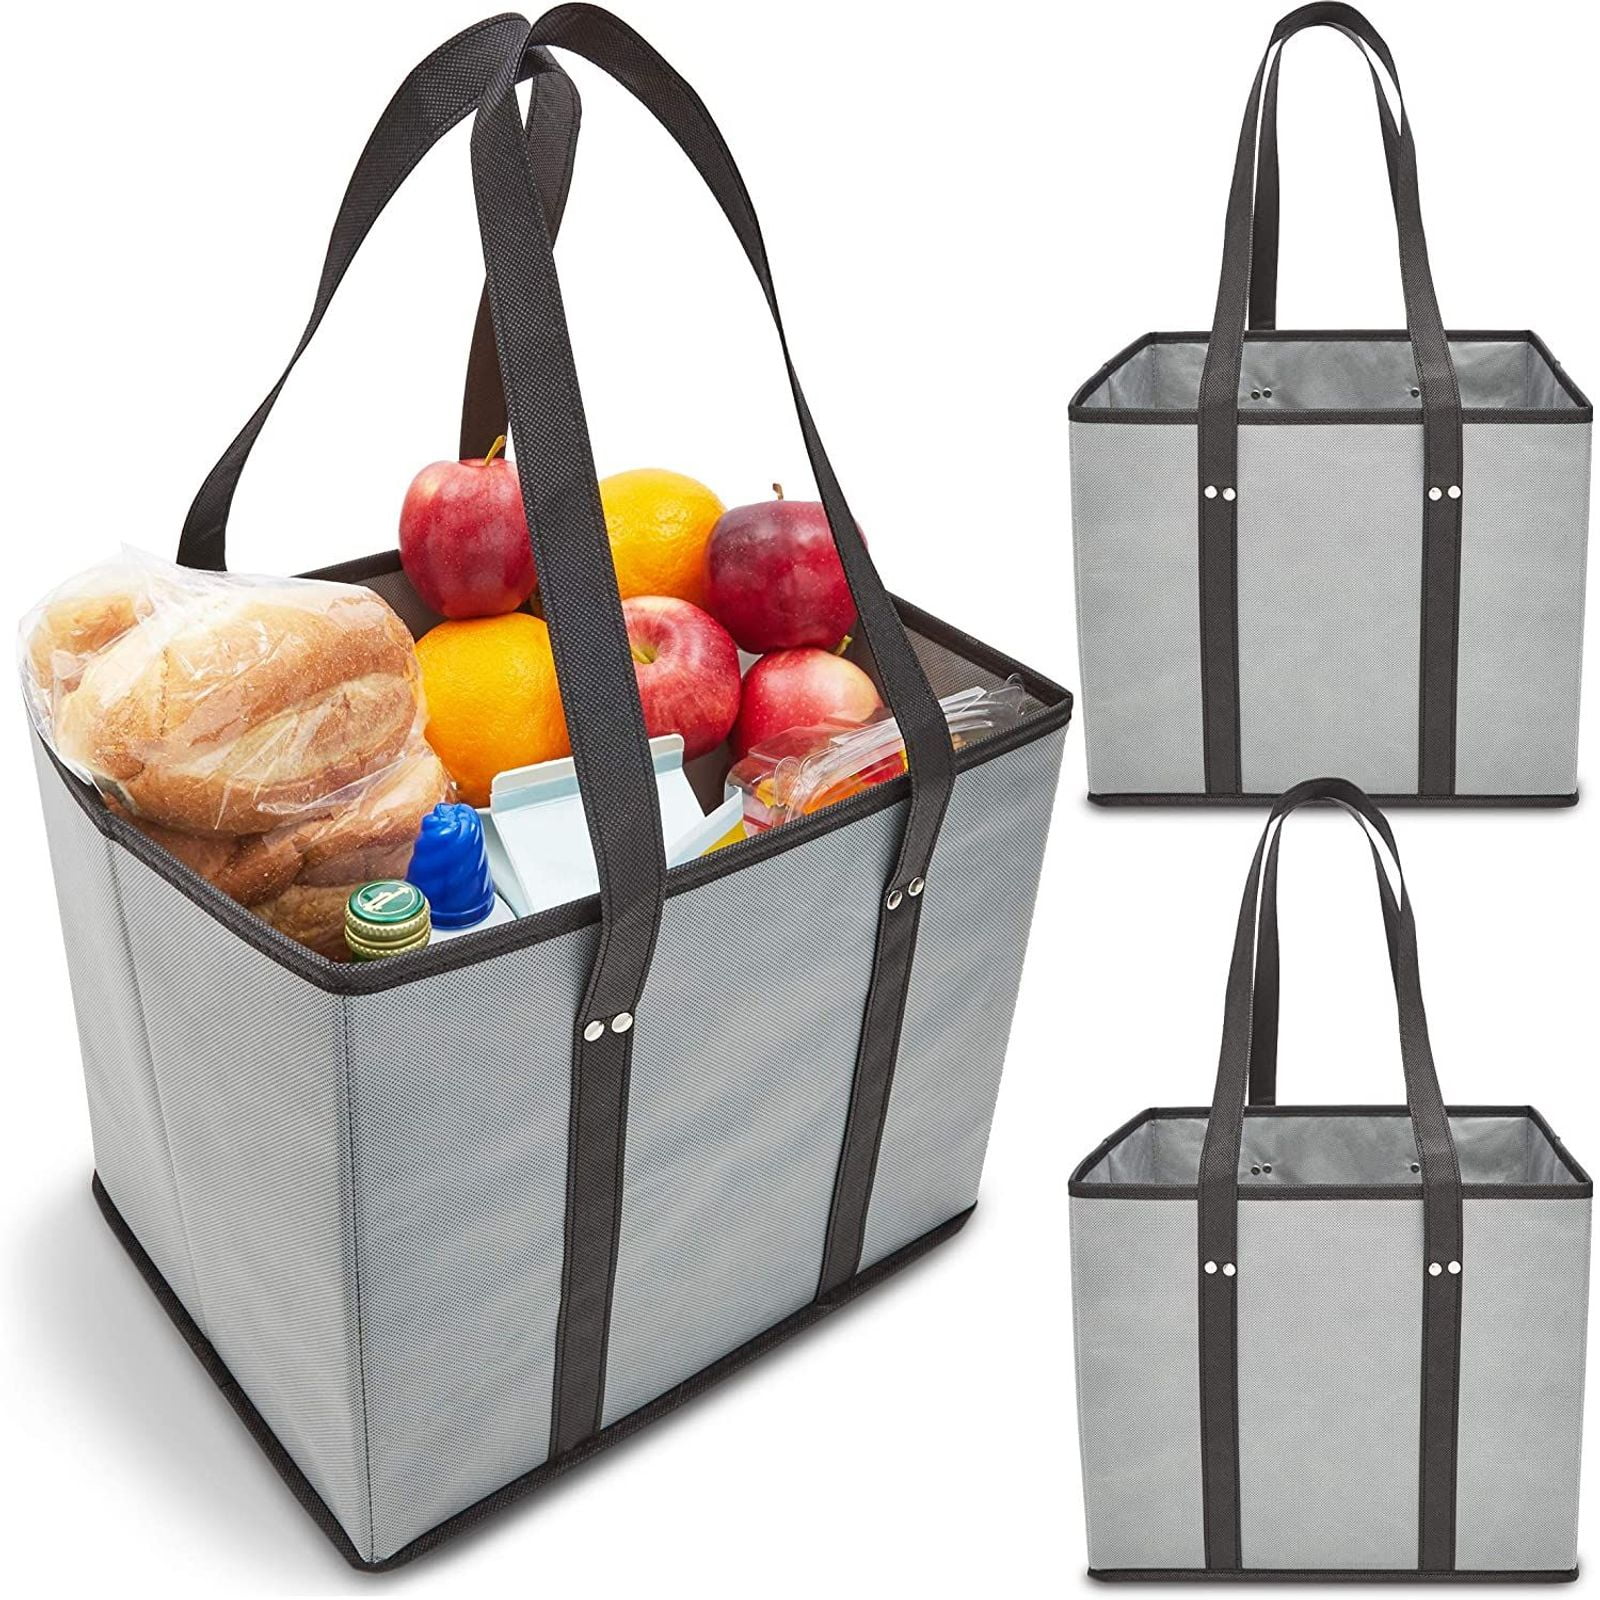 Details about   3 PCS Reusable Grocery Bags Foldable Shopping Tote Bag Eco-Friendly Super Strong 